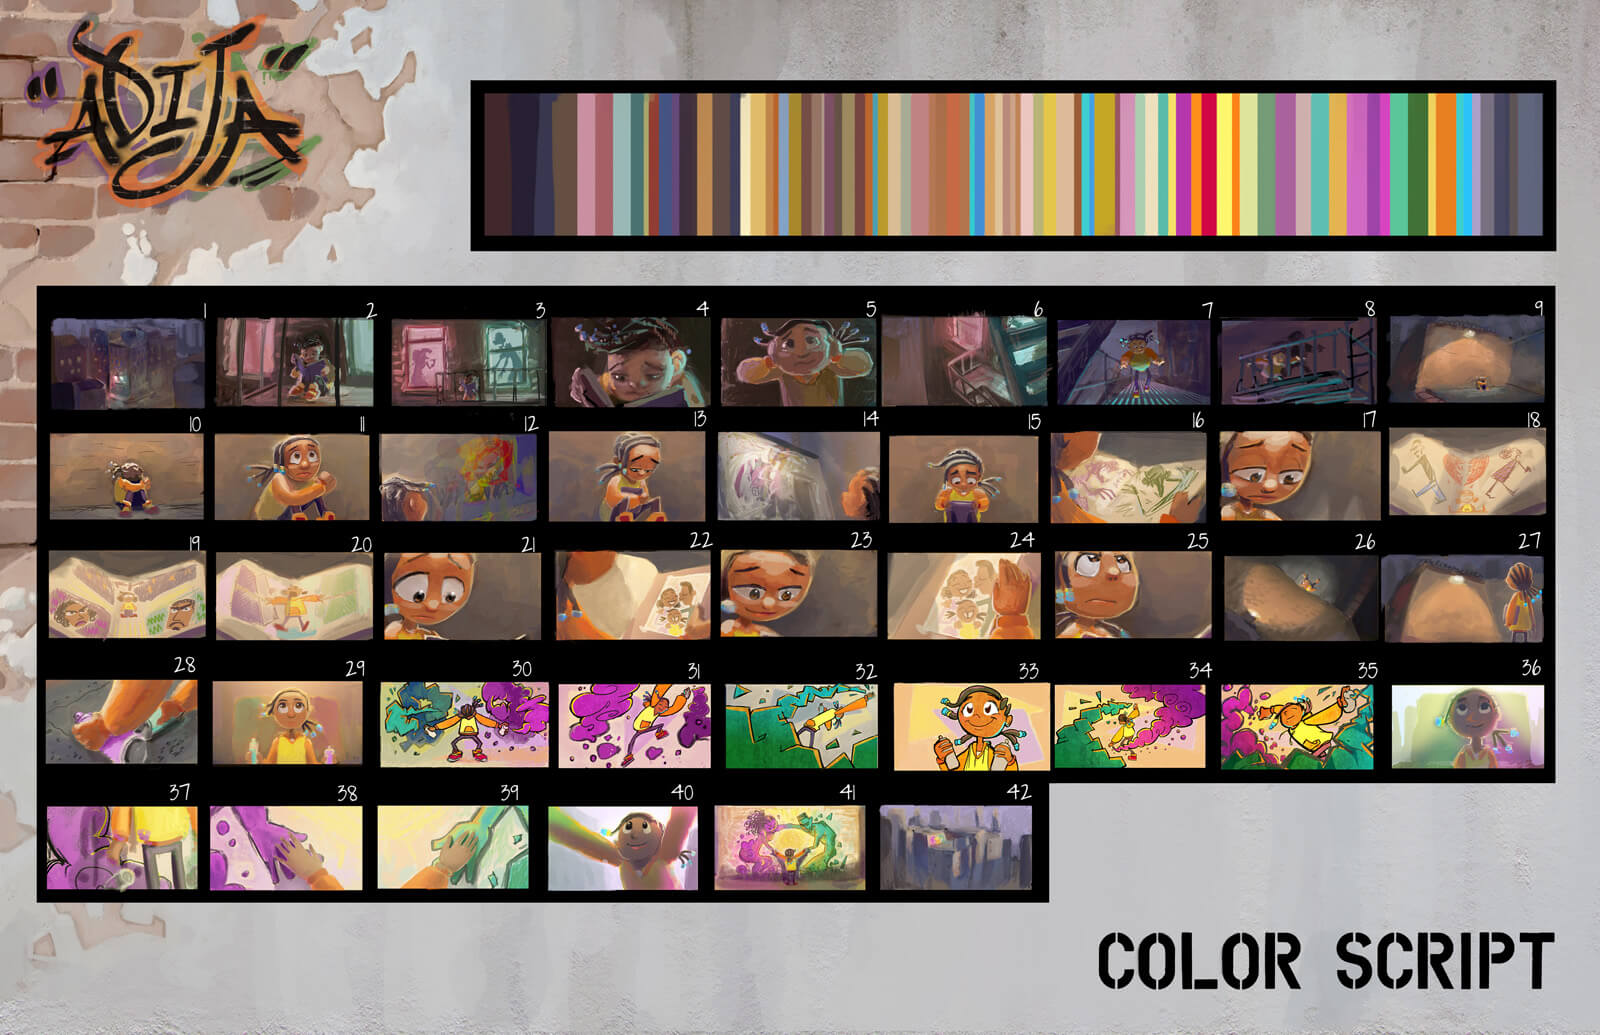 Color storyboard of the film Adija depicting the action from the beginning to end